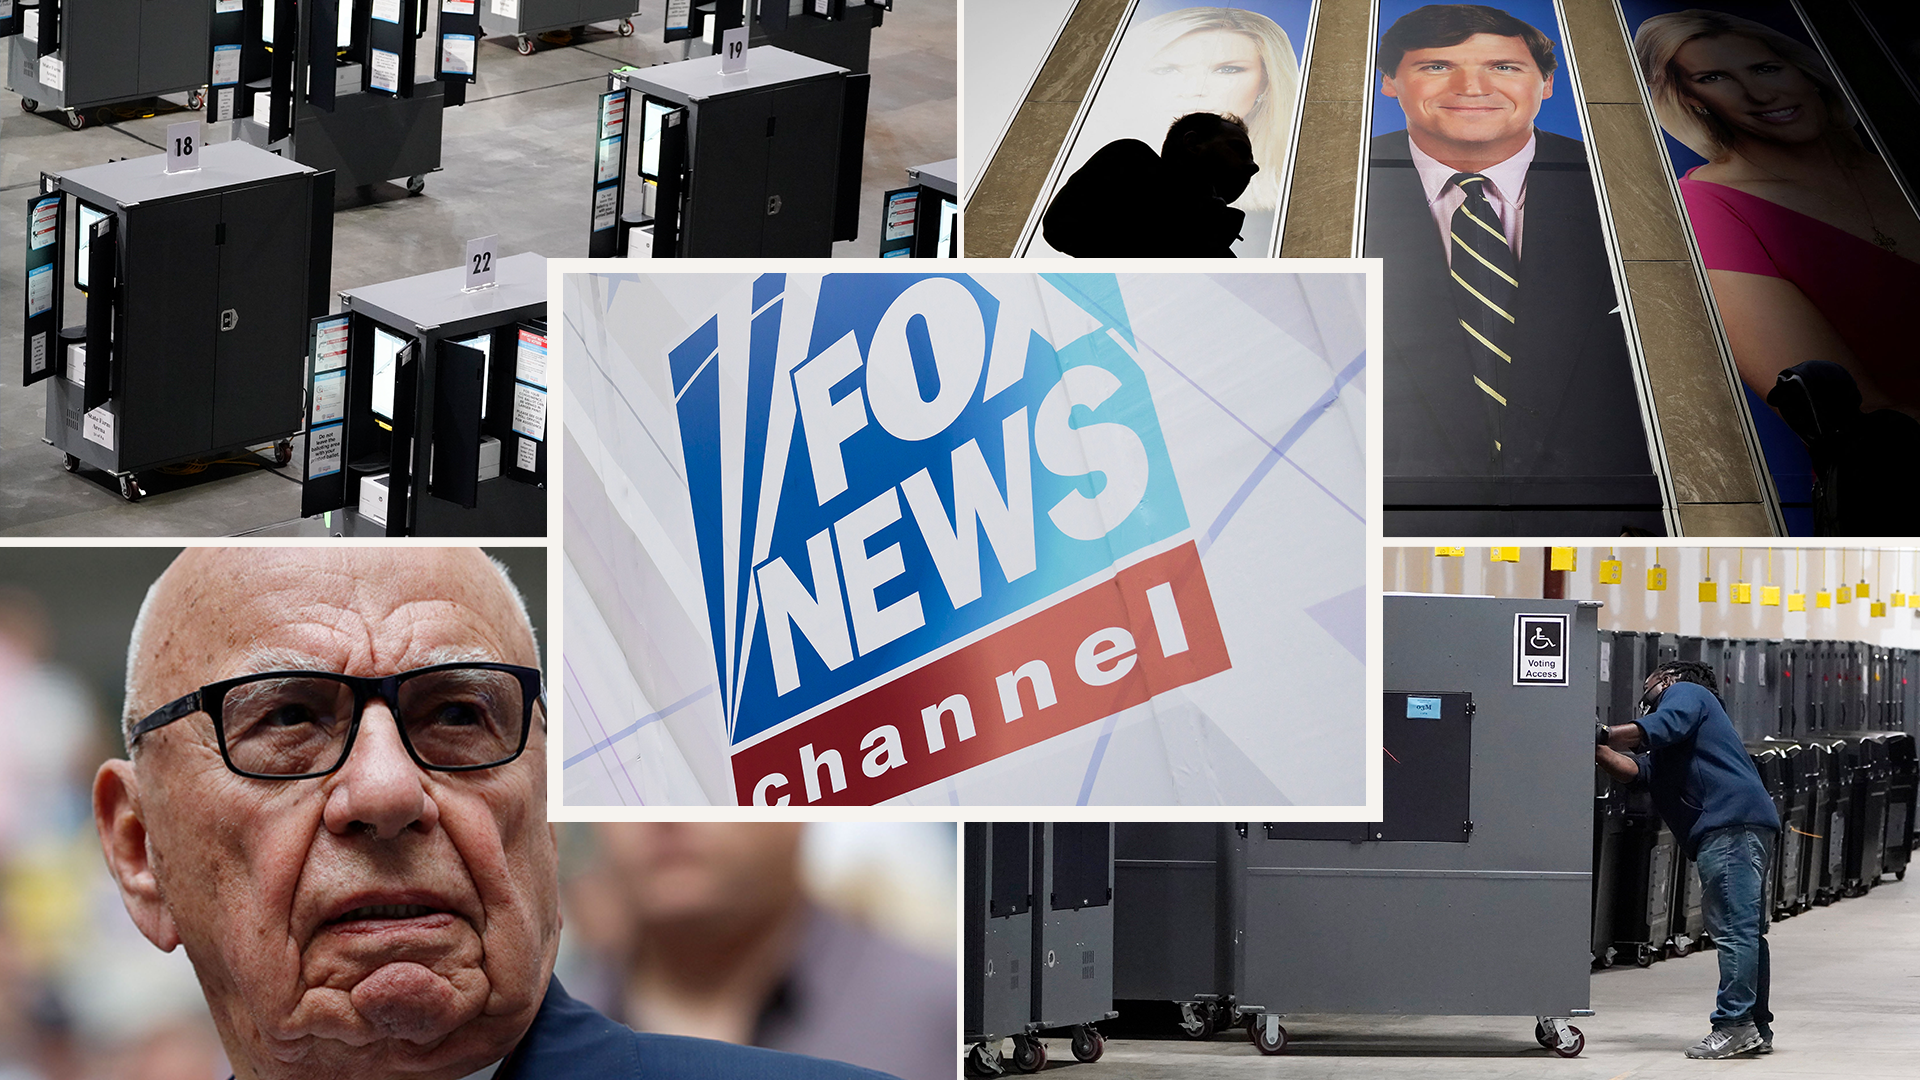 WHITE FLAG: FOX News Surrenders, Settles, Pays Dominion Voting Systems $787,500,000